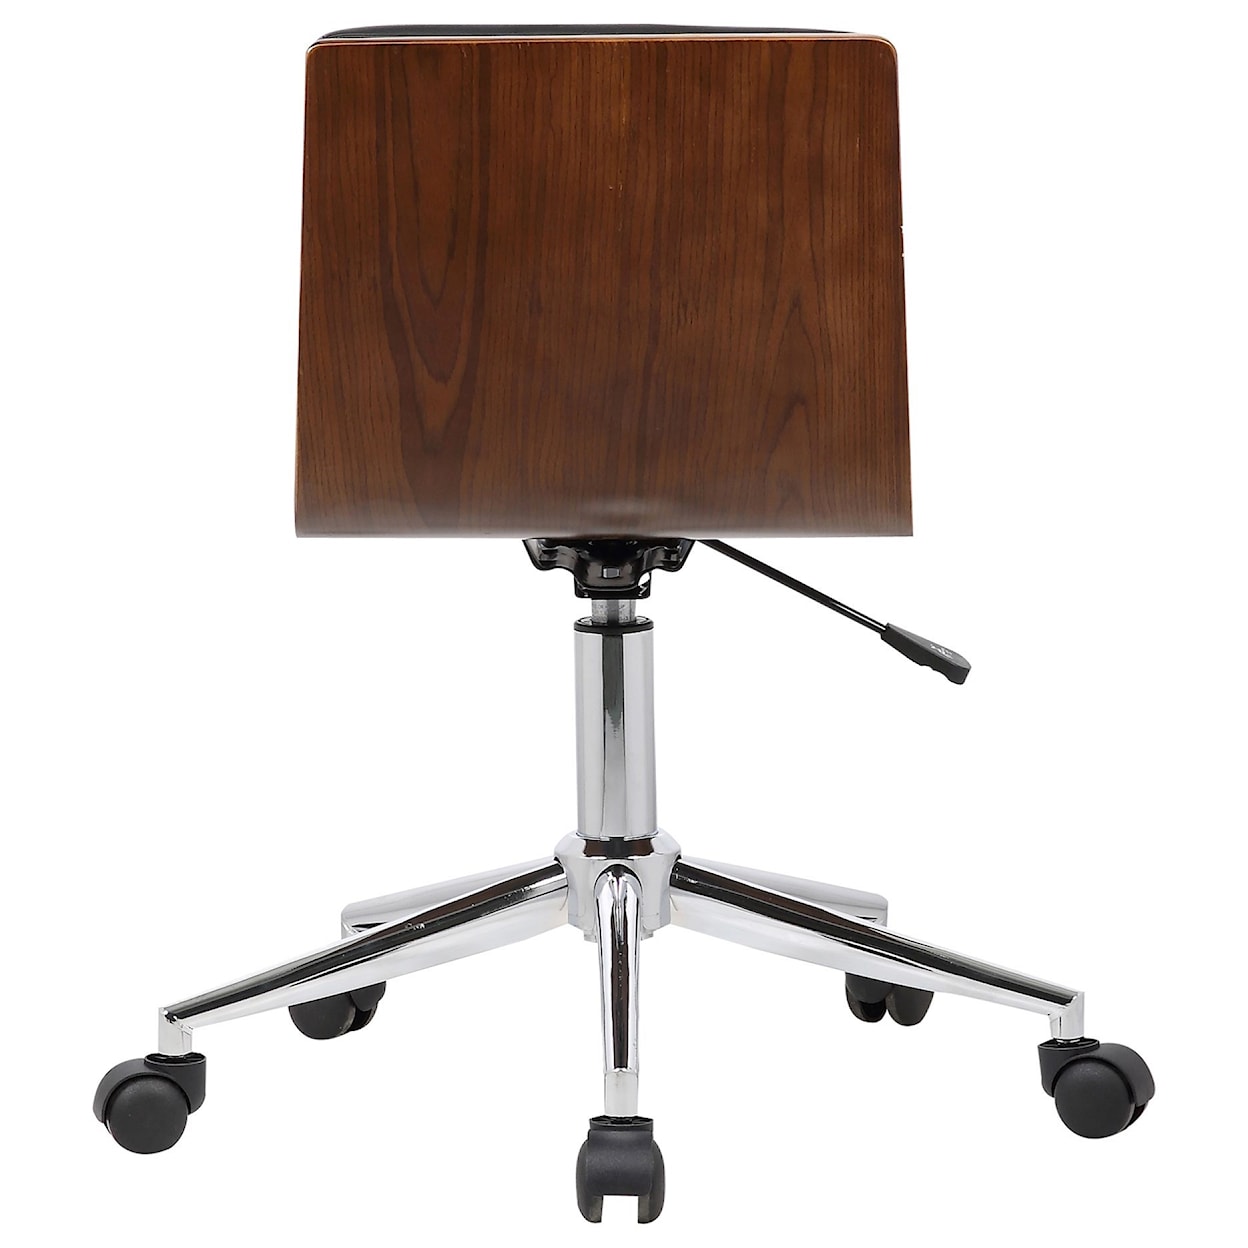 Armen Living Bowie Mid-Century Office Chair